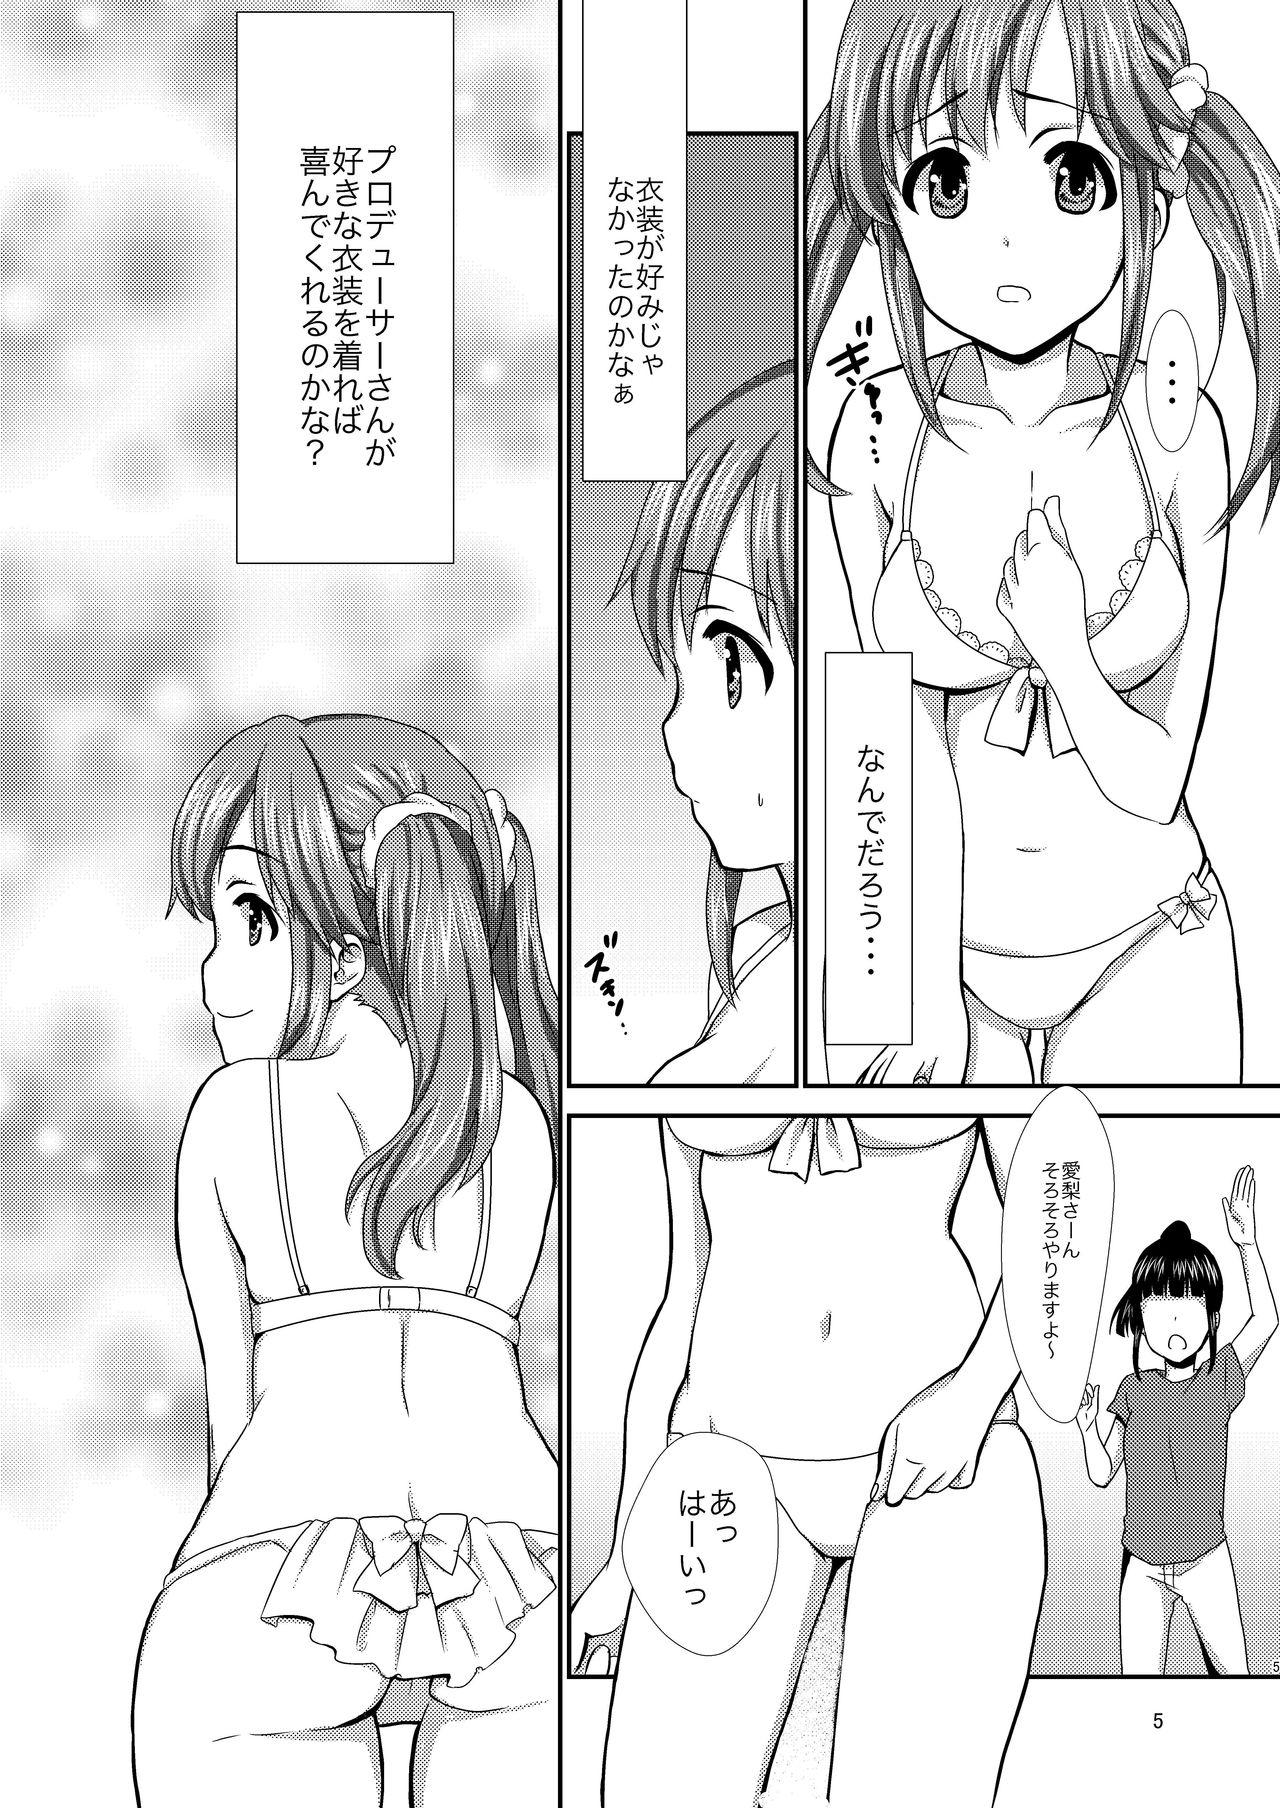 Naturaltits office+love4 - The idolmaster Cumshots - Page 4